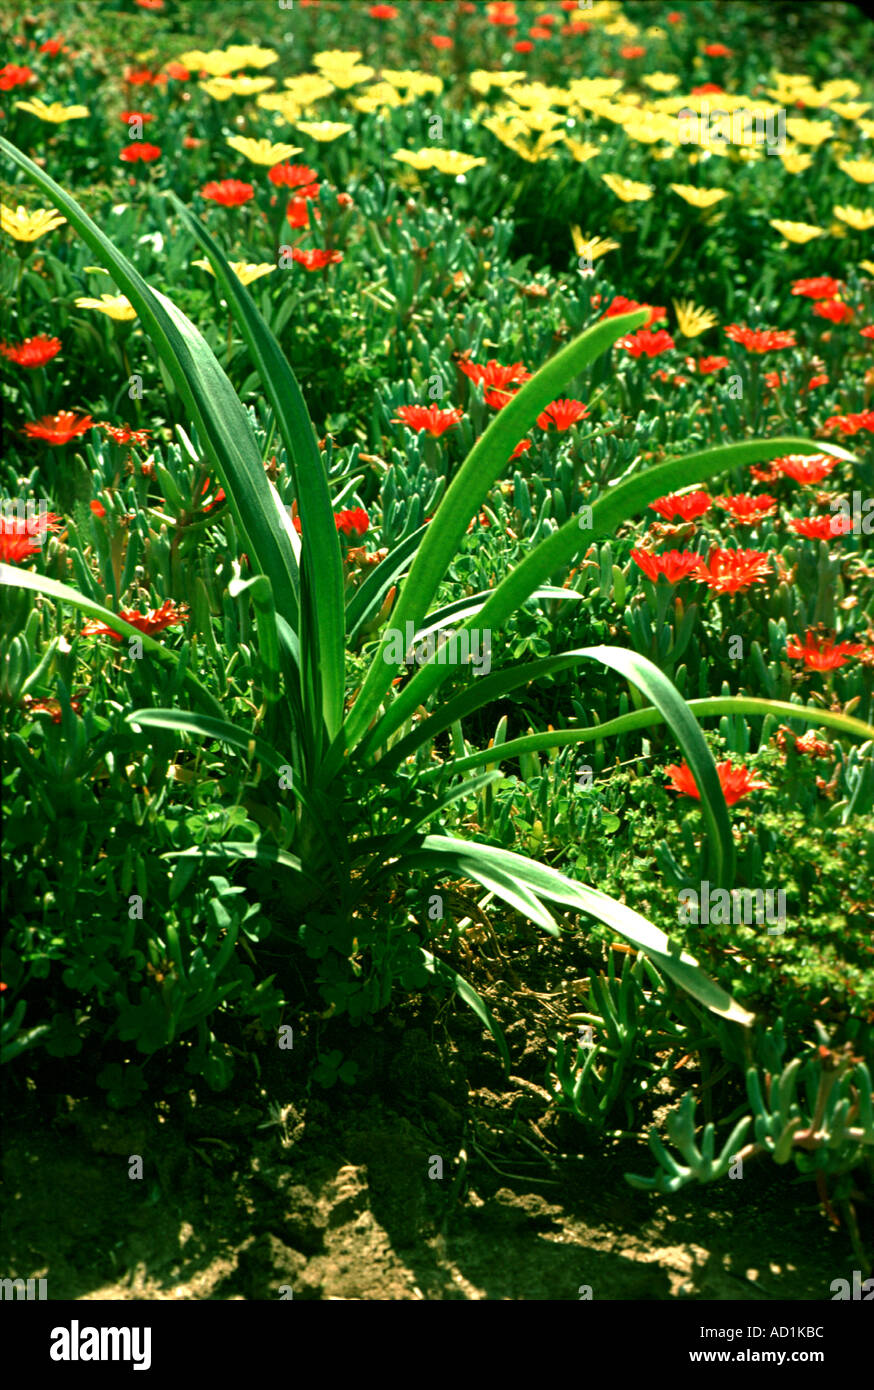 Garden Flowers, Green, Yellow, Red, daytime, fields landscape full color nature, Stock Photo